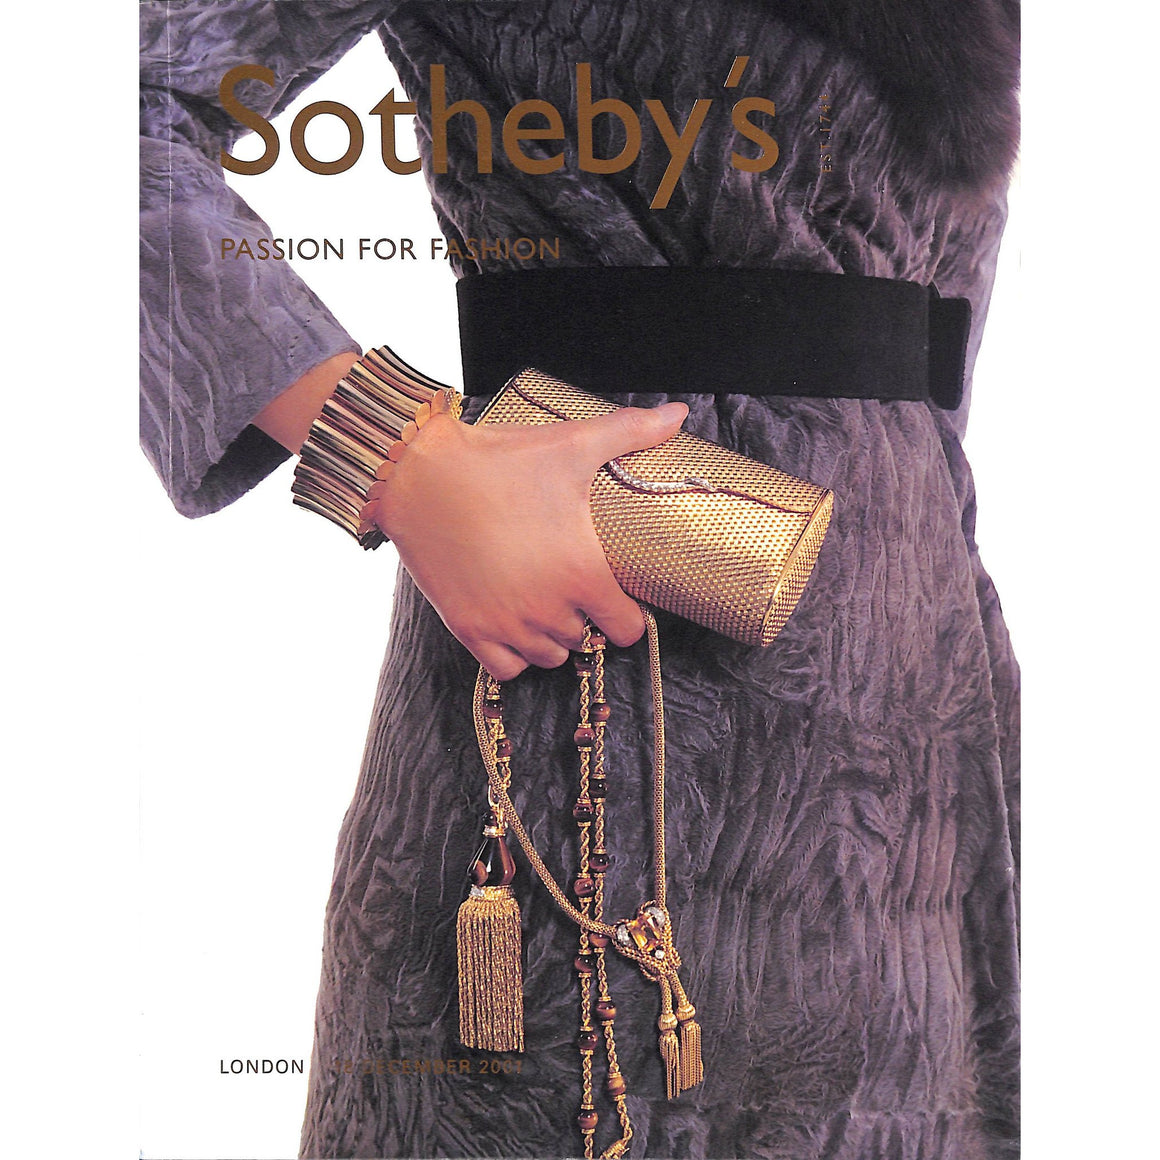 Sotheby's Passion For Fashion